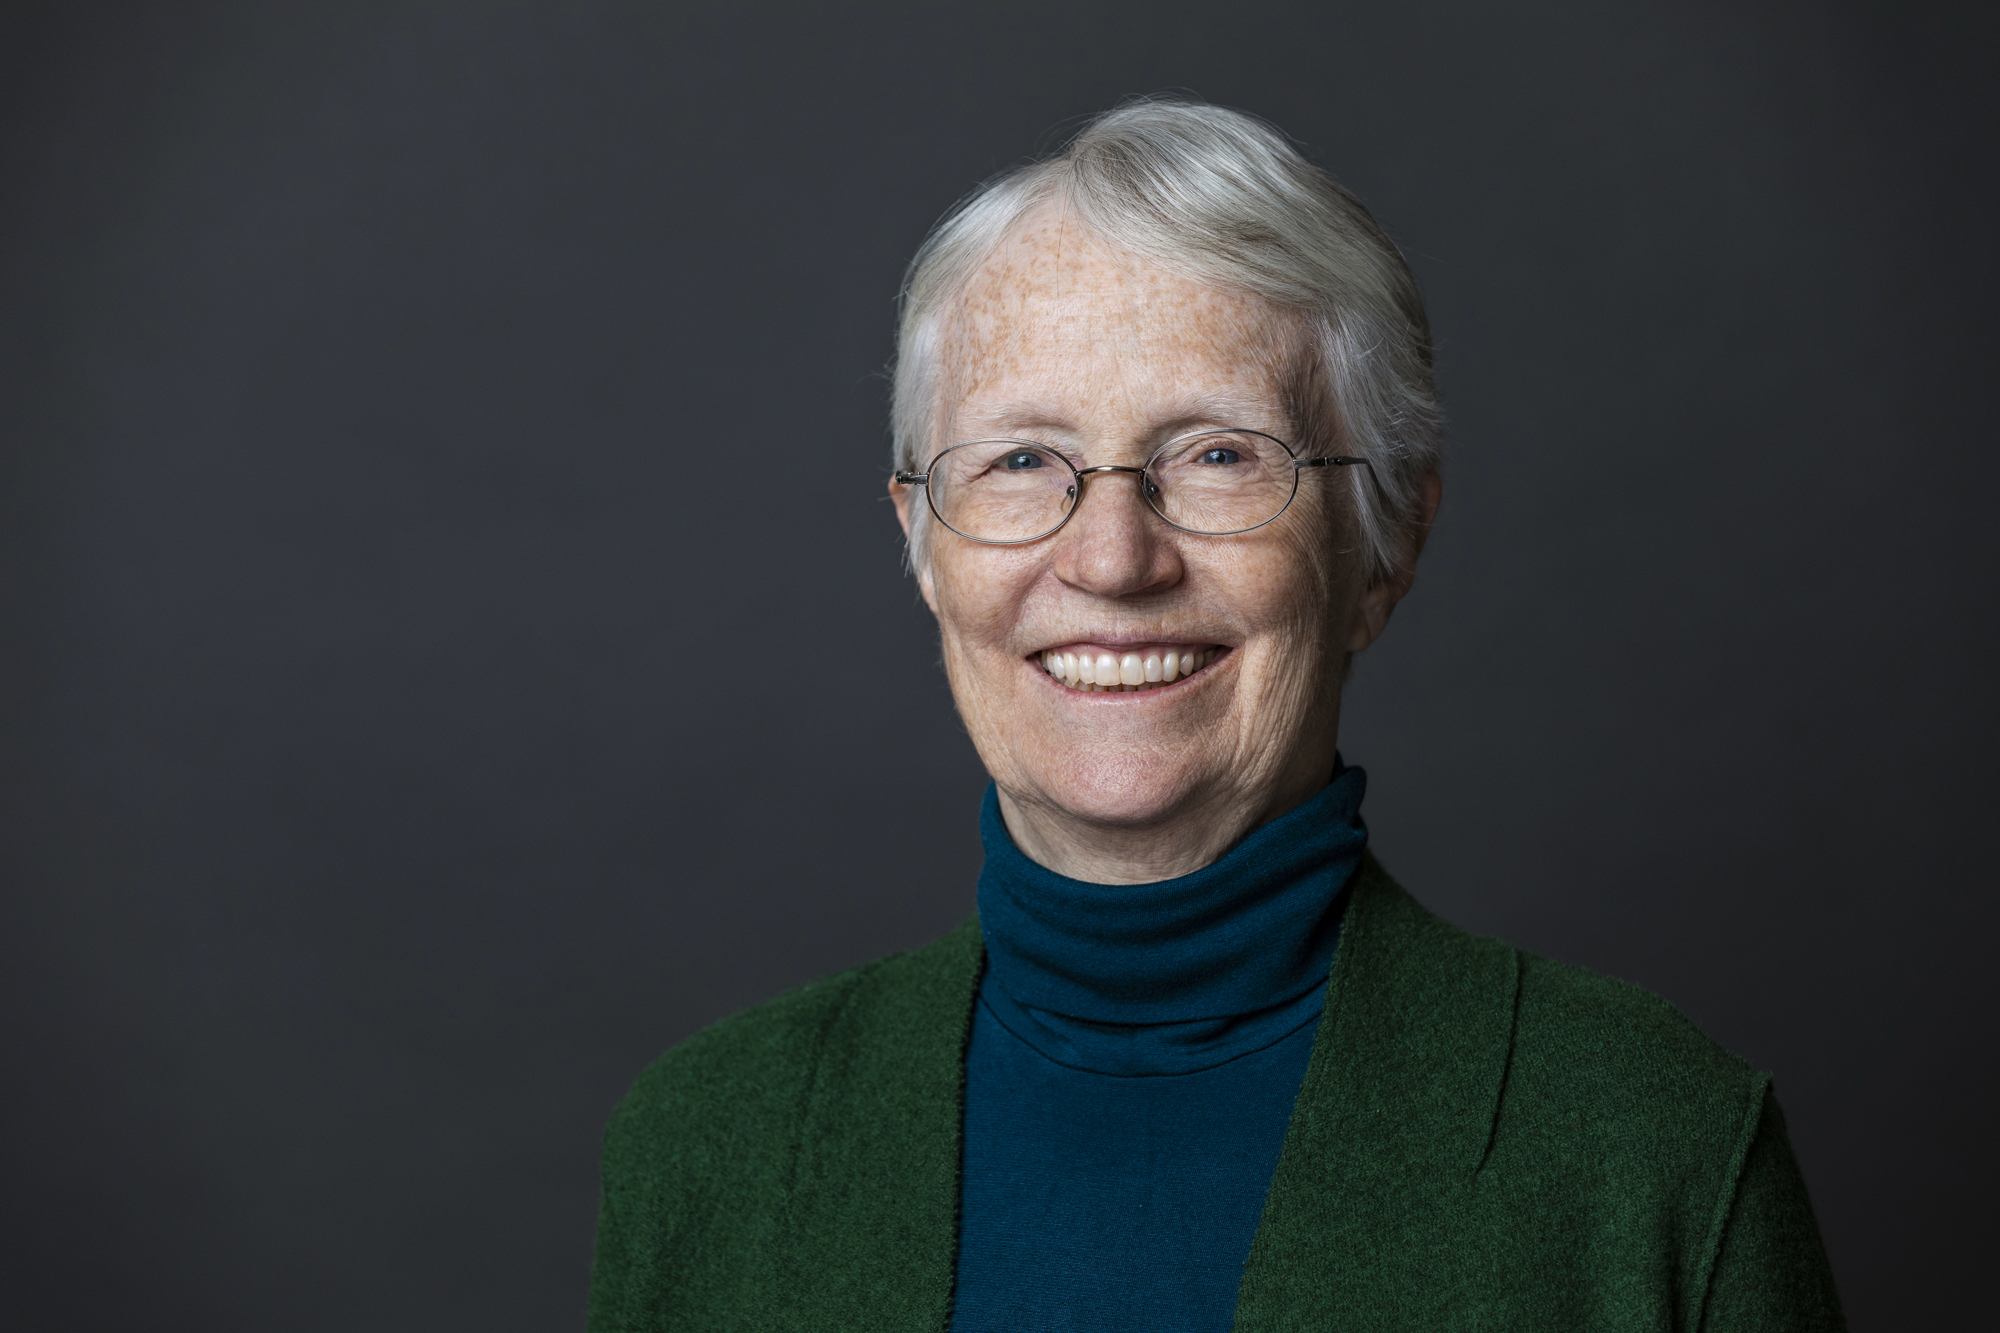 A headshot of Cynthia Rosenzweig. She is smiling, has short gray hair and glasses, and is wearing a navy blue turtleneck and green blazer.